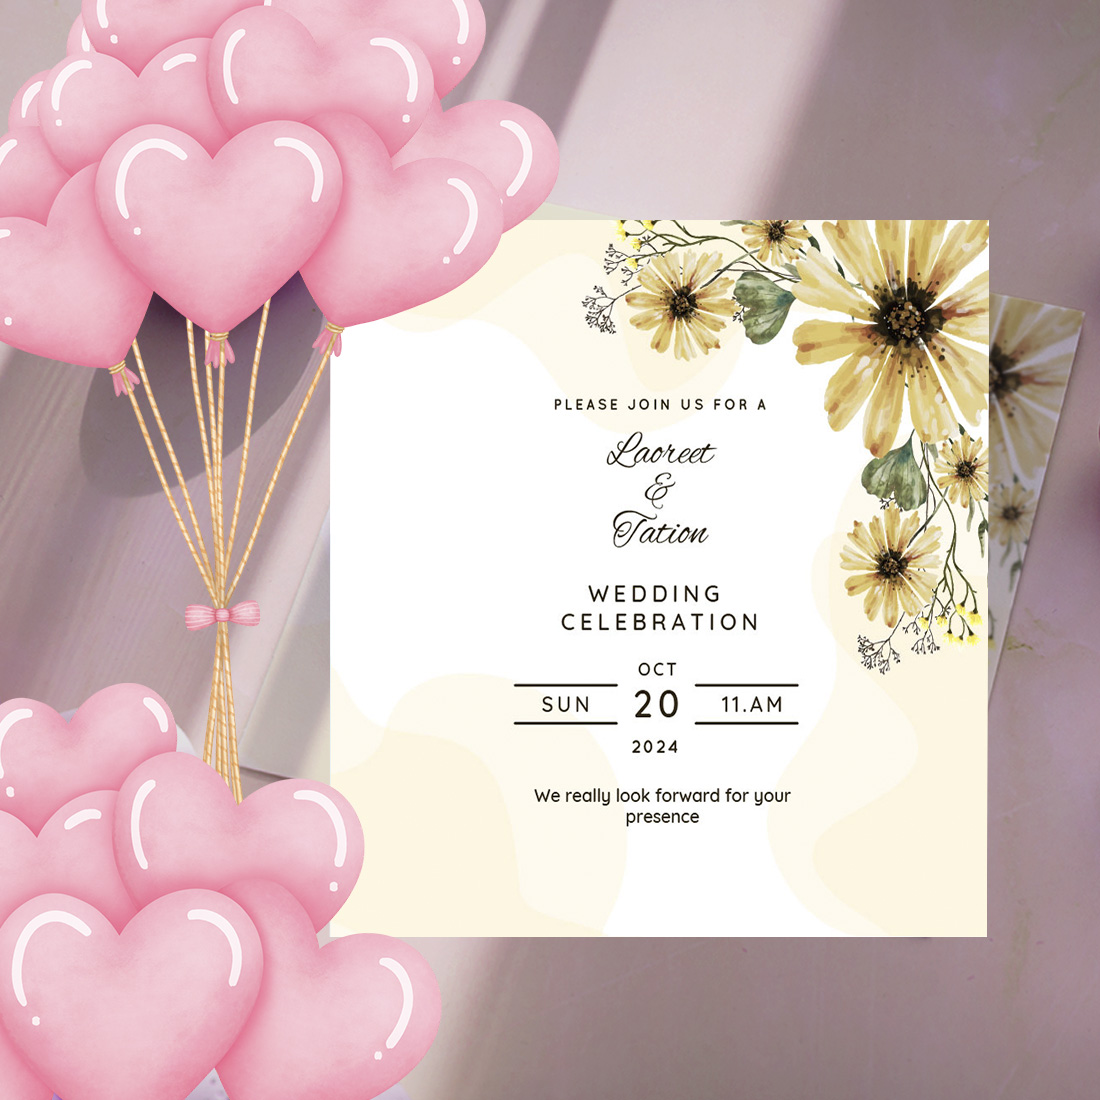 Camomile Yellow Wedding Card Design cover image.